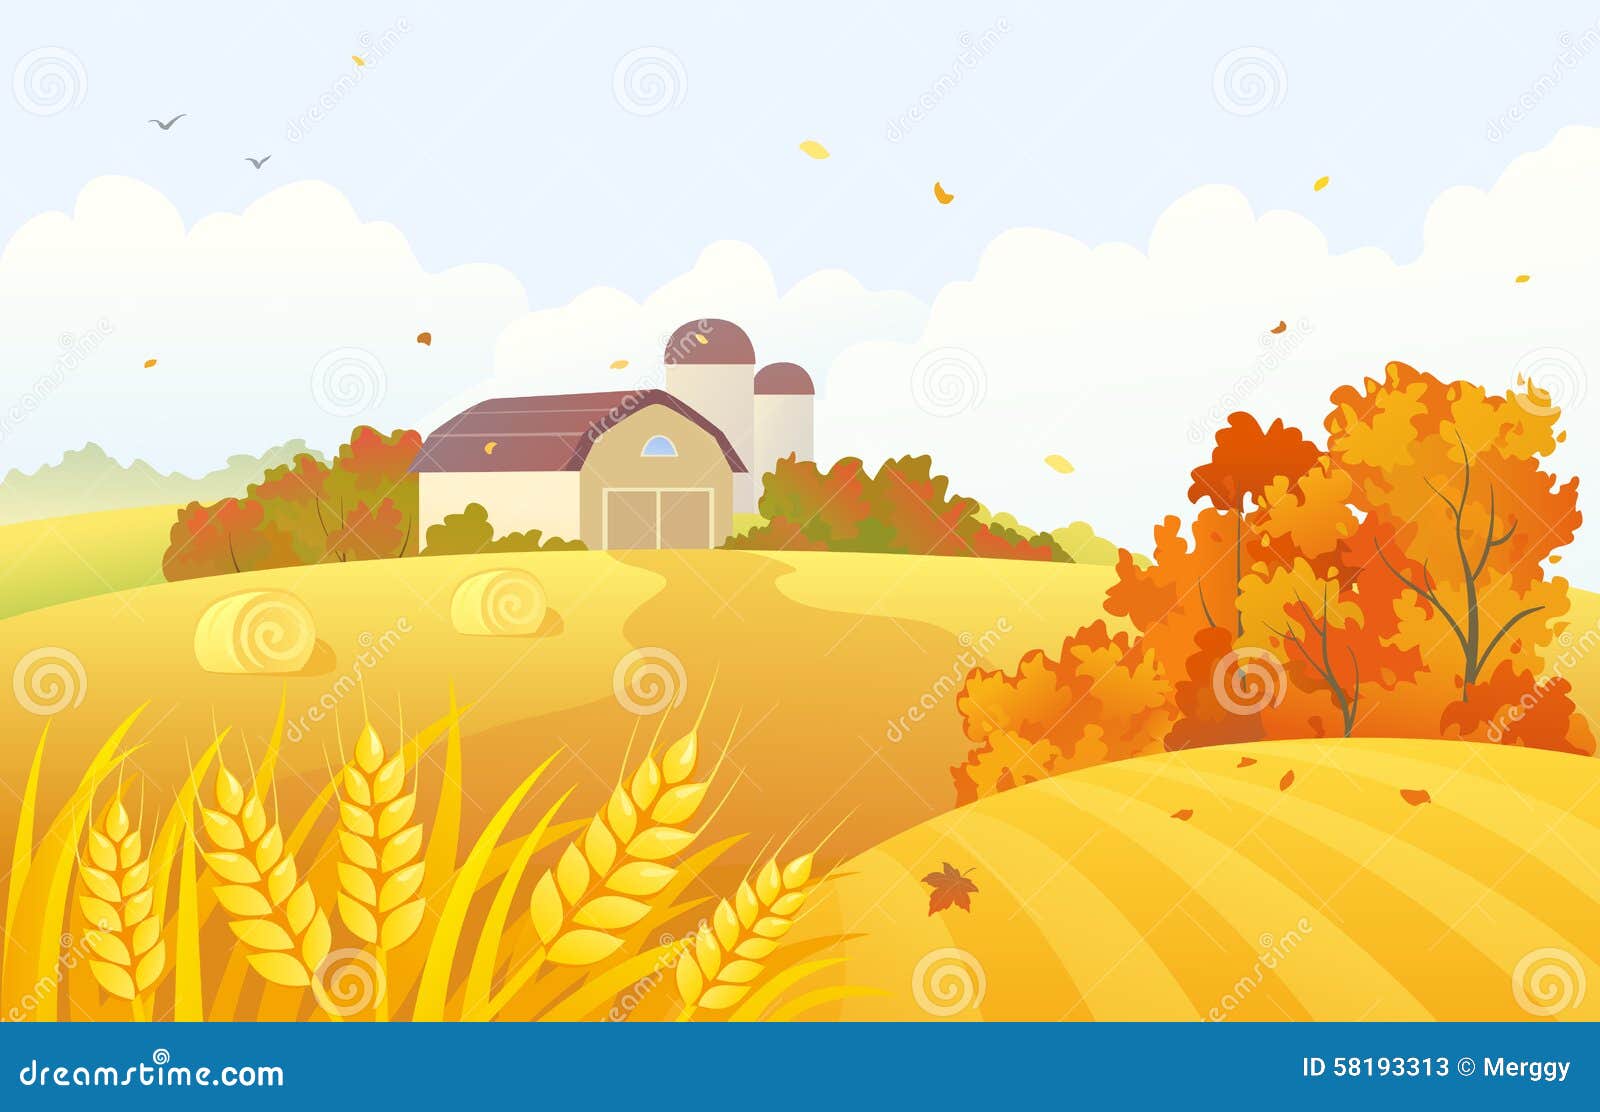 free clipart of fall scenes - photo #11